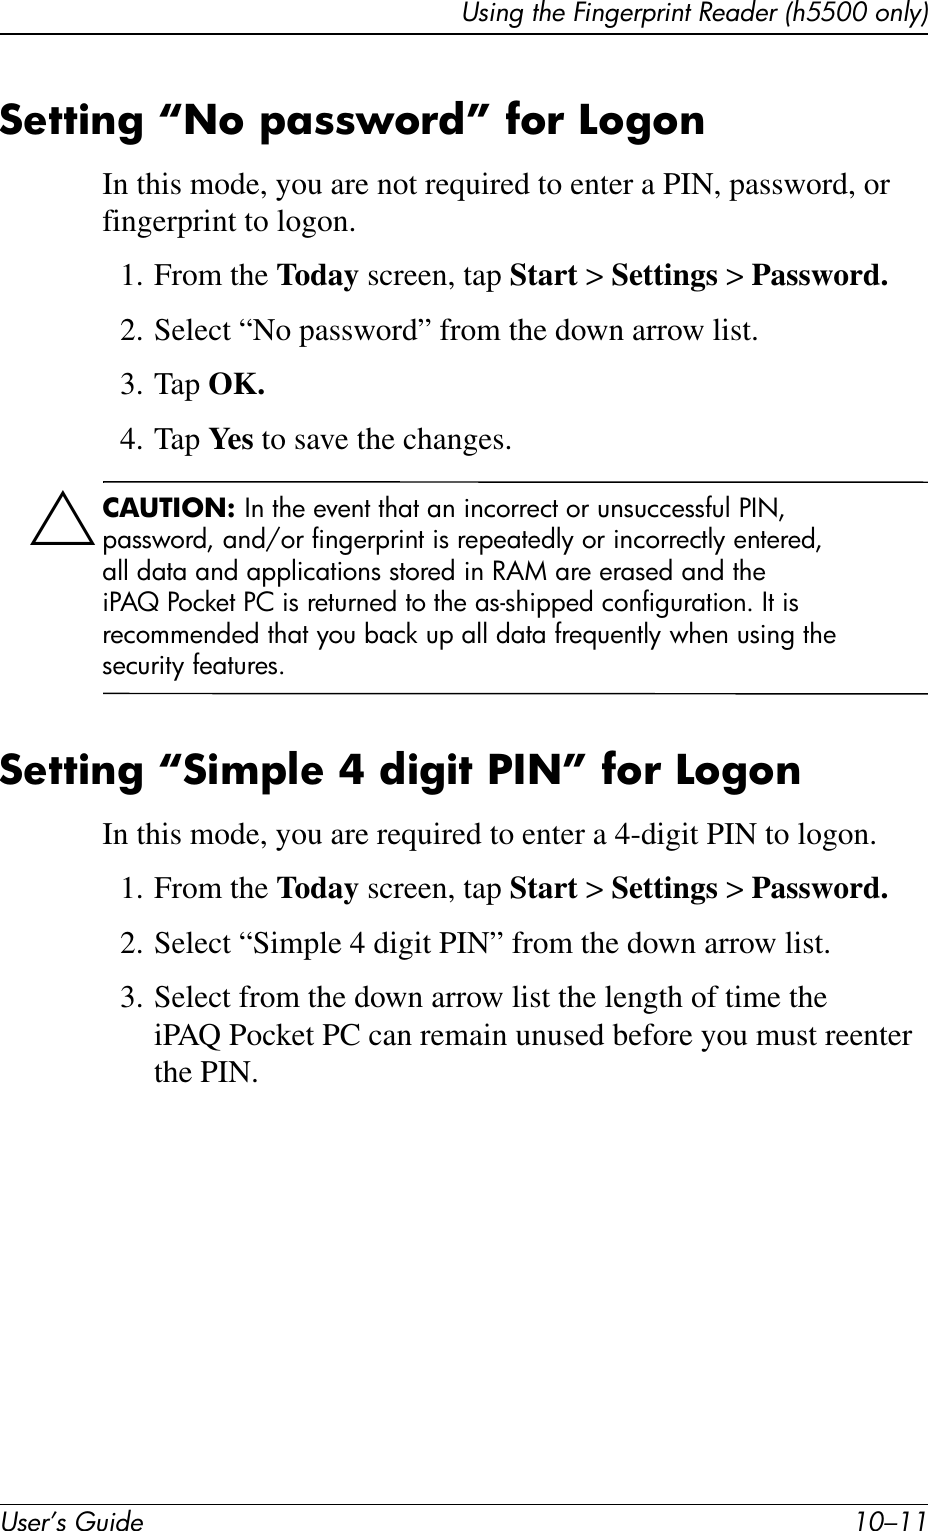 Using the Fingerprint Reader (h5500 only)User’s Guide 10–11Setting “No password” for LogonIn this mode, you are not required to enter a PIN, password, or fingerprint to logon.1. From the Today screen, tap Start &gt; Settings &gt; Password.2. Select “No password” from the down arrow list.3. Tap OK.4. Tap Ye s  to save the changes.ÄCAUTION: In the event that an incorrect or unsuccessful PIN, password, and/or fingerprint is repeatedly or incorrectly entered, all data and applications stored in RAM are erased and the iPAQ Pocket PC is returned to the as-shipped configuration. It is recommended that you back up all data frequently when using the security features.Setting “Simple 4 digit PIN” for LogonIn this mode, you are required to enter a 4-digit PIN to logon.1. From the Today screen, tap Start &gt; Settings &gt; Password.2. Select “Simple 4 digit PIN” from the down arrow list.3. Select from the down arrow list the length of time the iPAQ Pocket PC can remain unused before you must reenter the PIN.